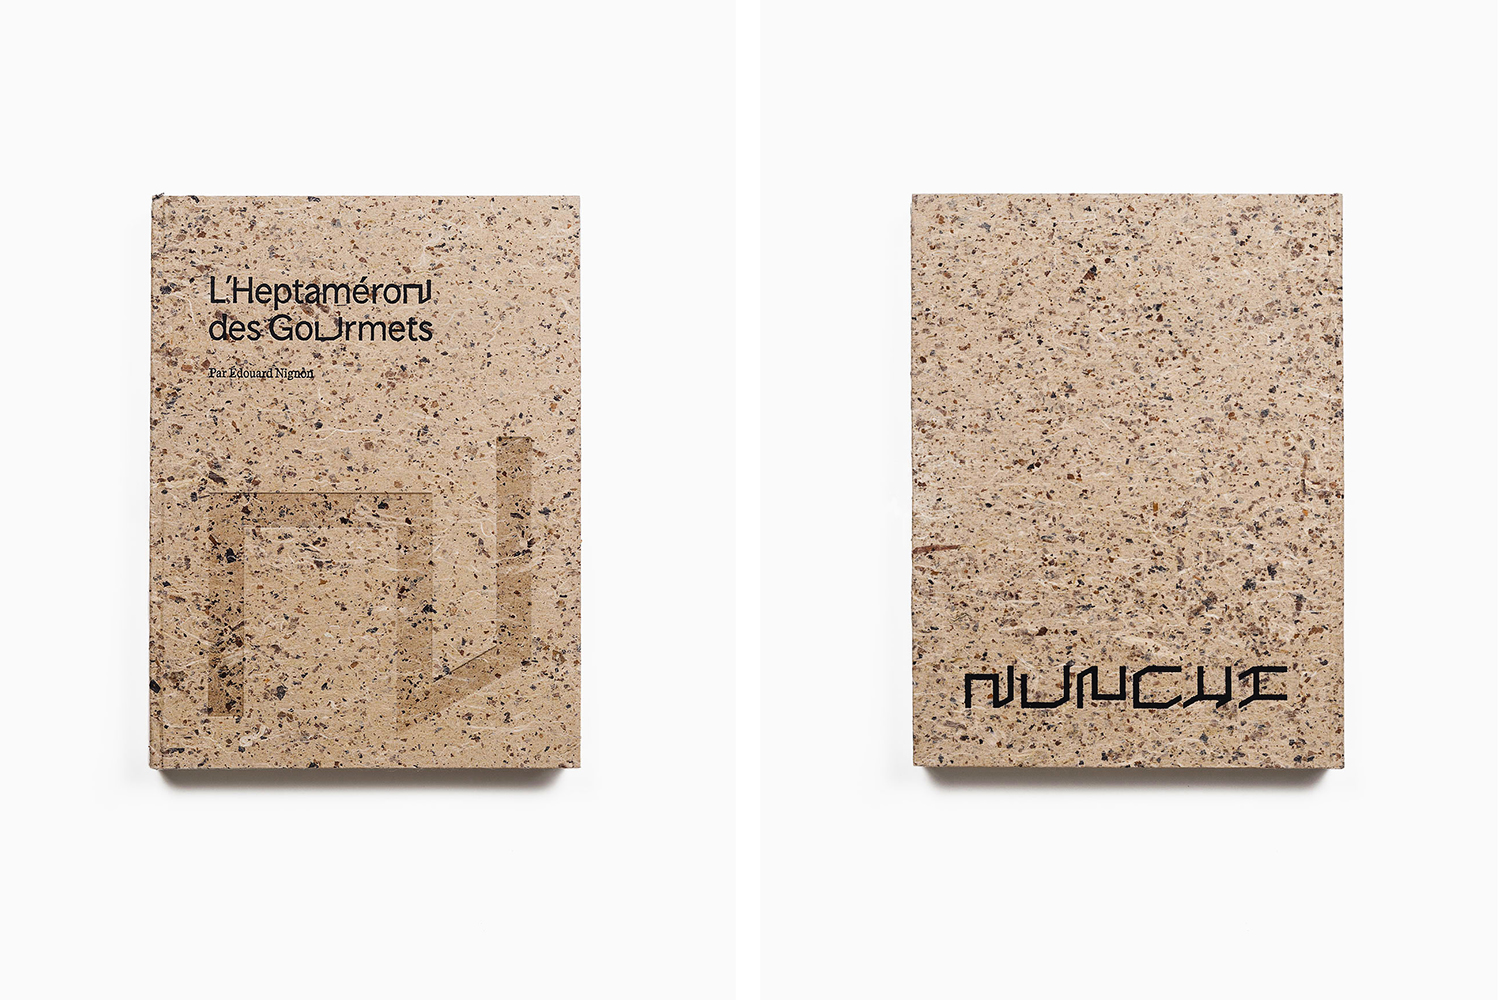 New logo and custom typeface designed by Bedow for Nunchi, the gastronmonic project from Cedric Naudo